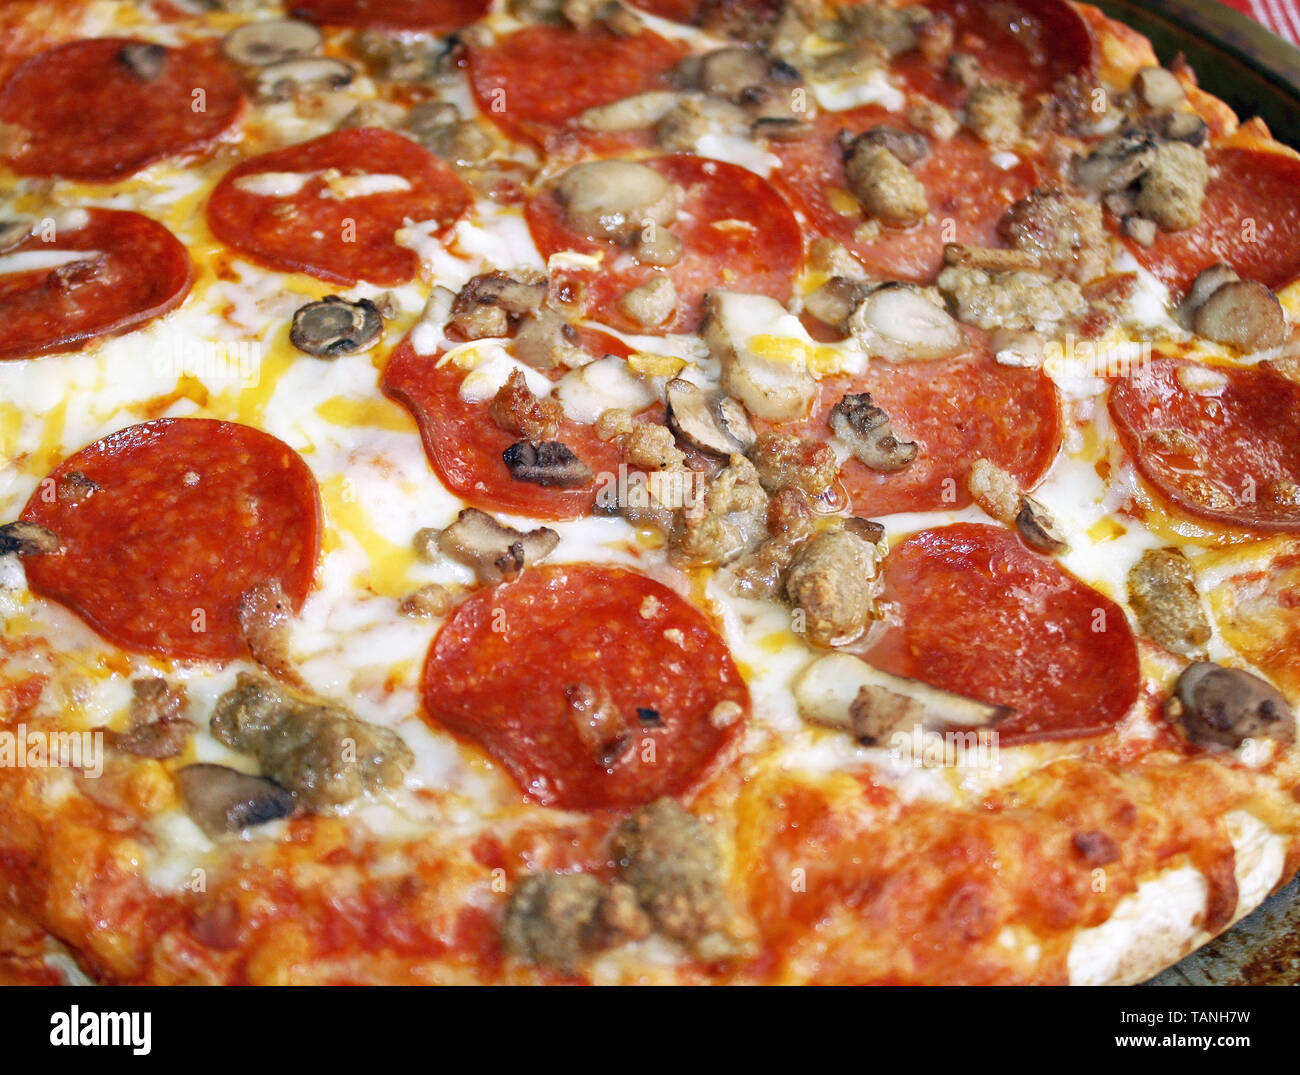 Fresh hot pizza with pepperoni, sausage, mushrooms and melted mozzarella cheese Stock Photo